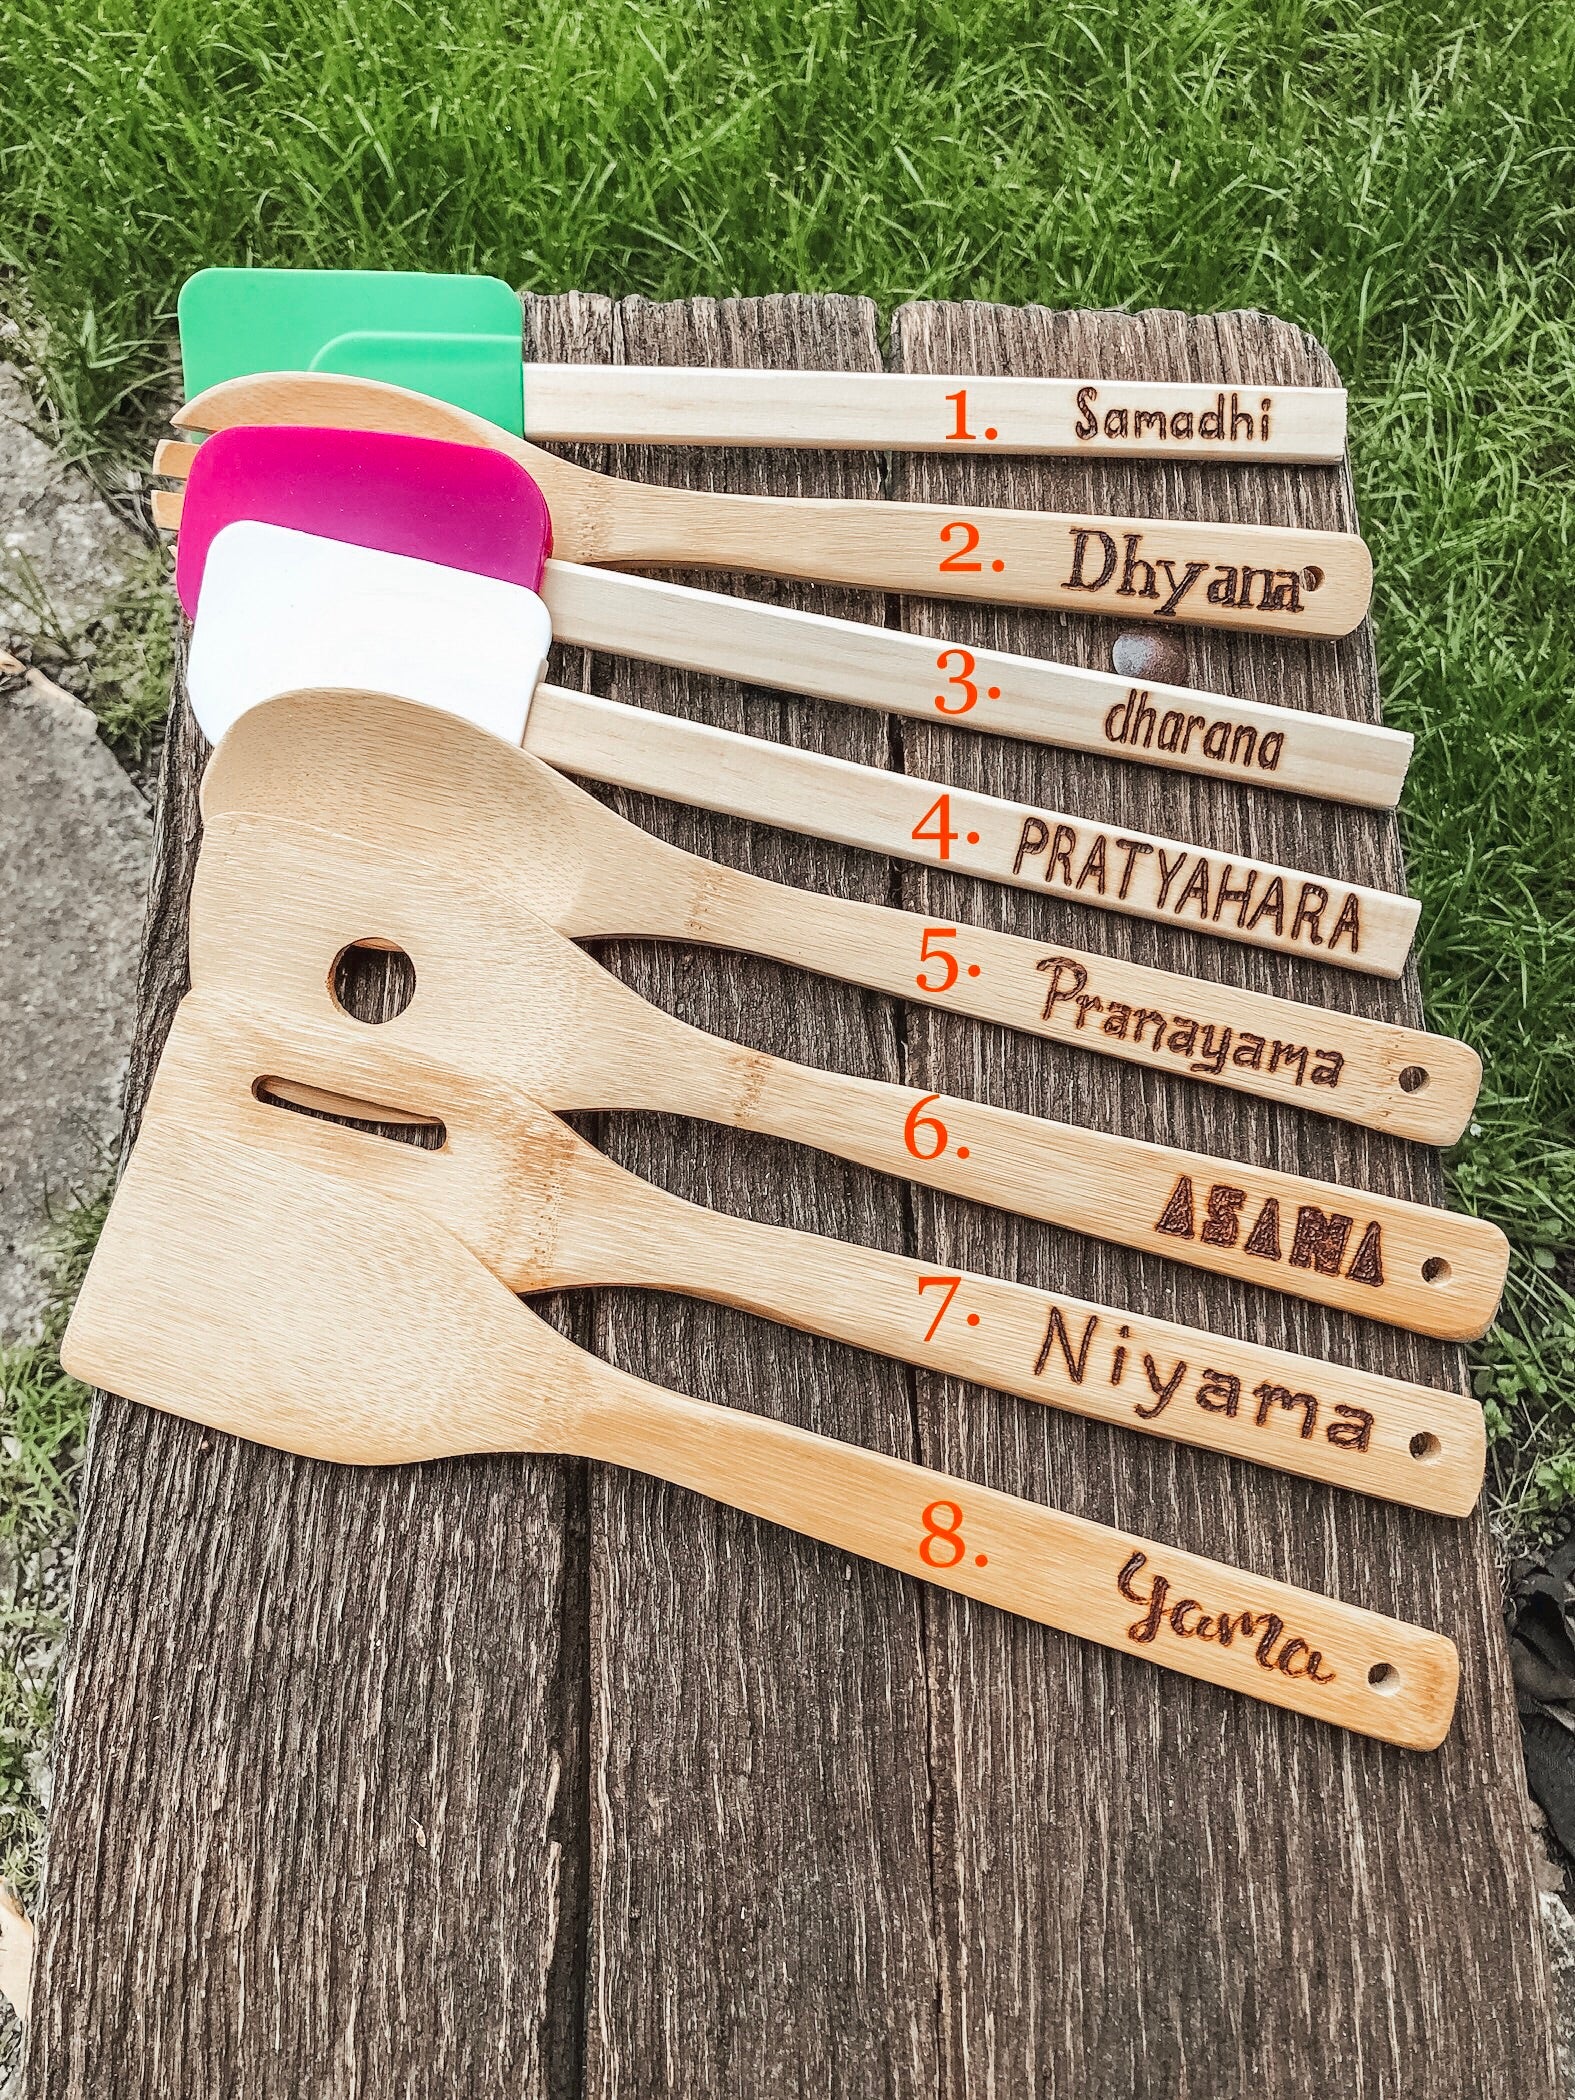 Customized Wooden Spoons/Spatulas -Set of 5